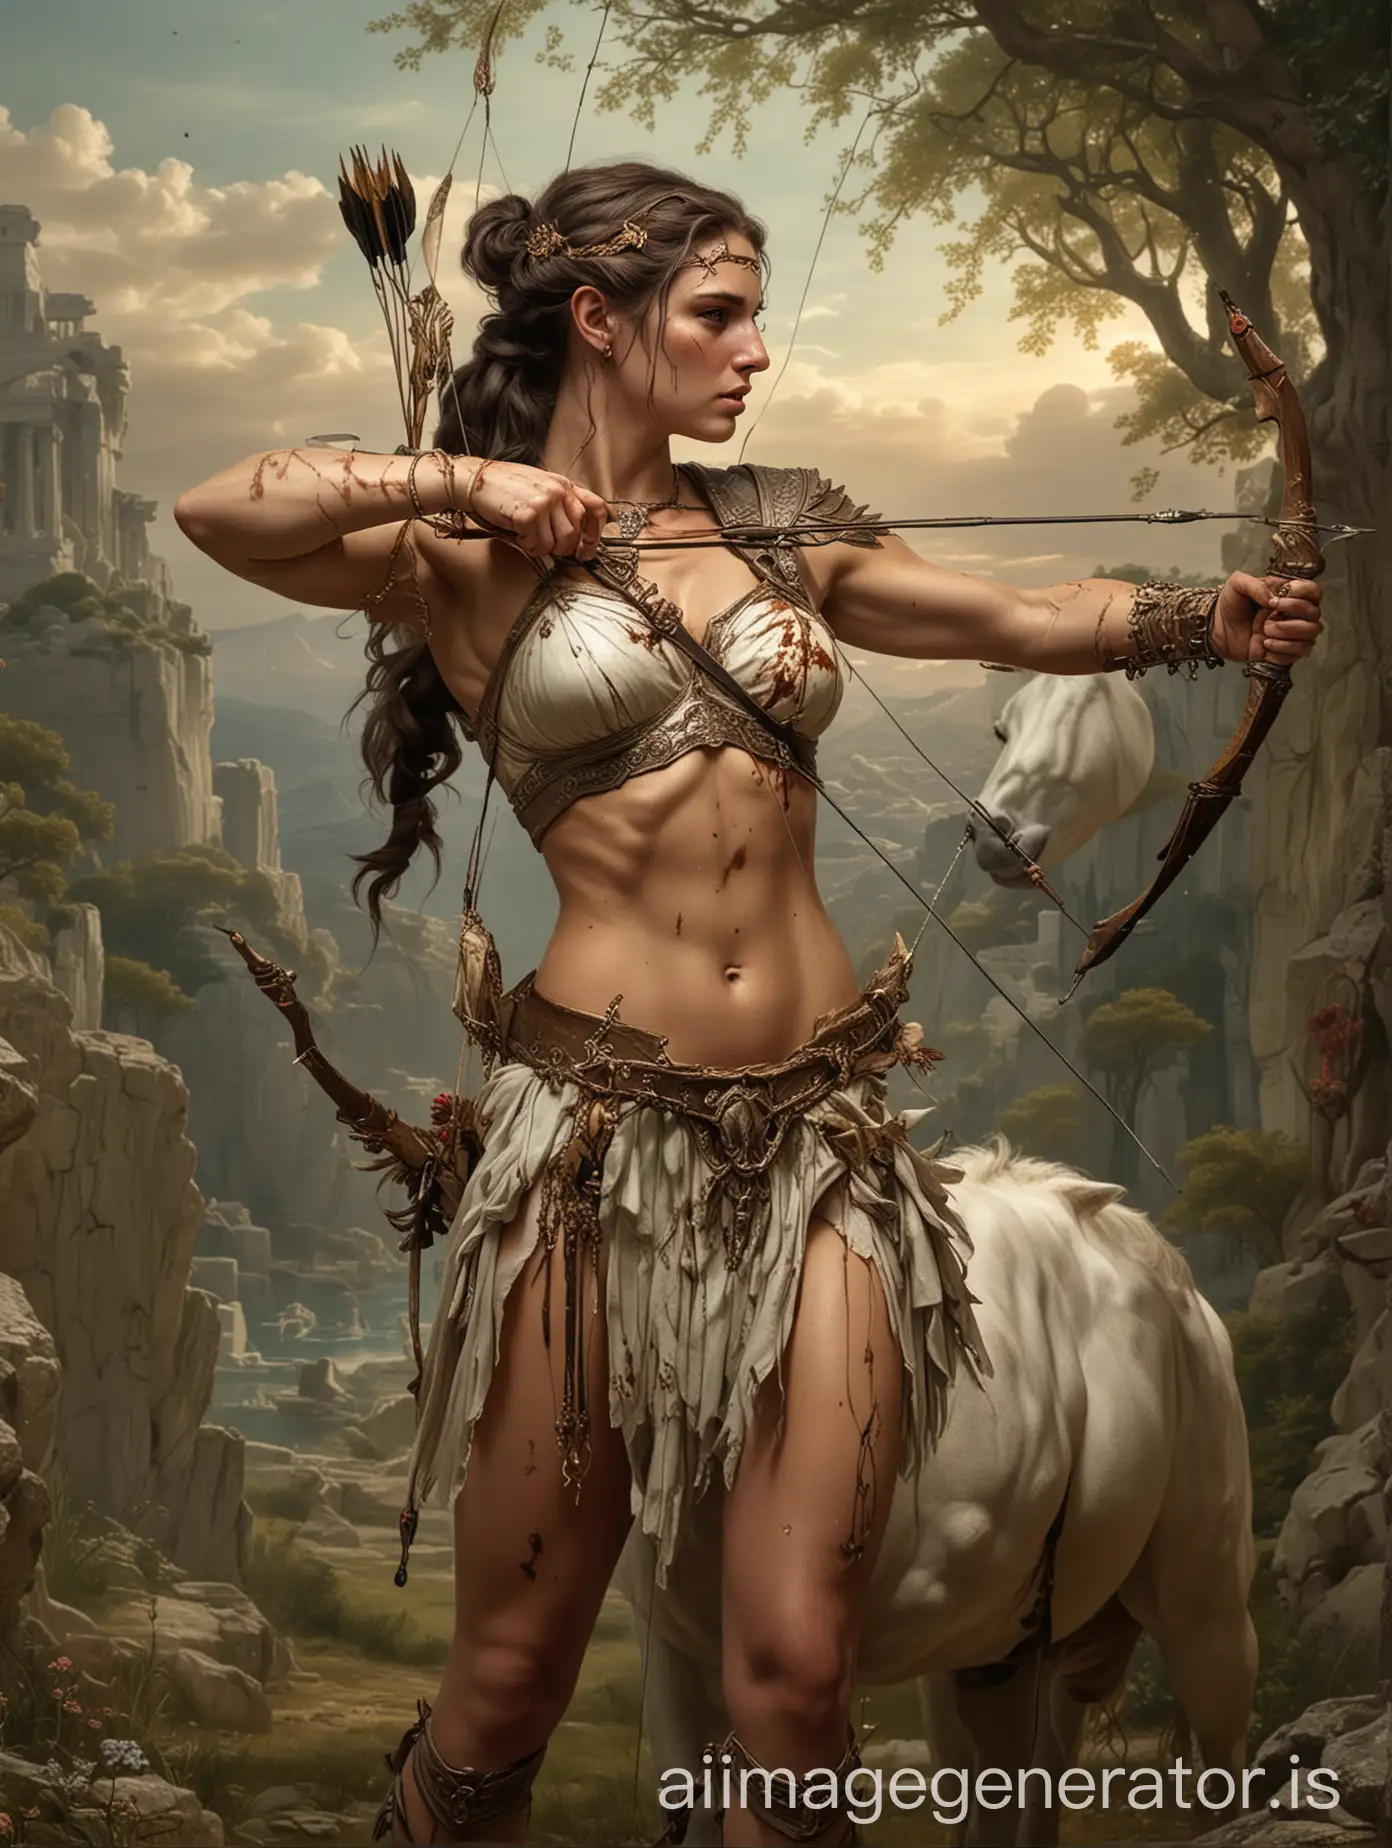 female centaur, with full background, wounded, with bow and arrow and jewelry, with greek mythology and nature done well in the background, done realistically